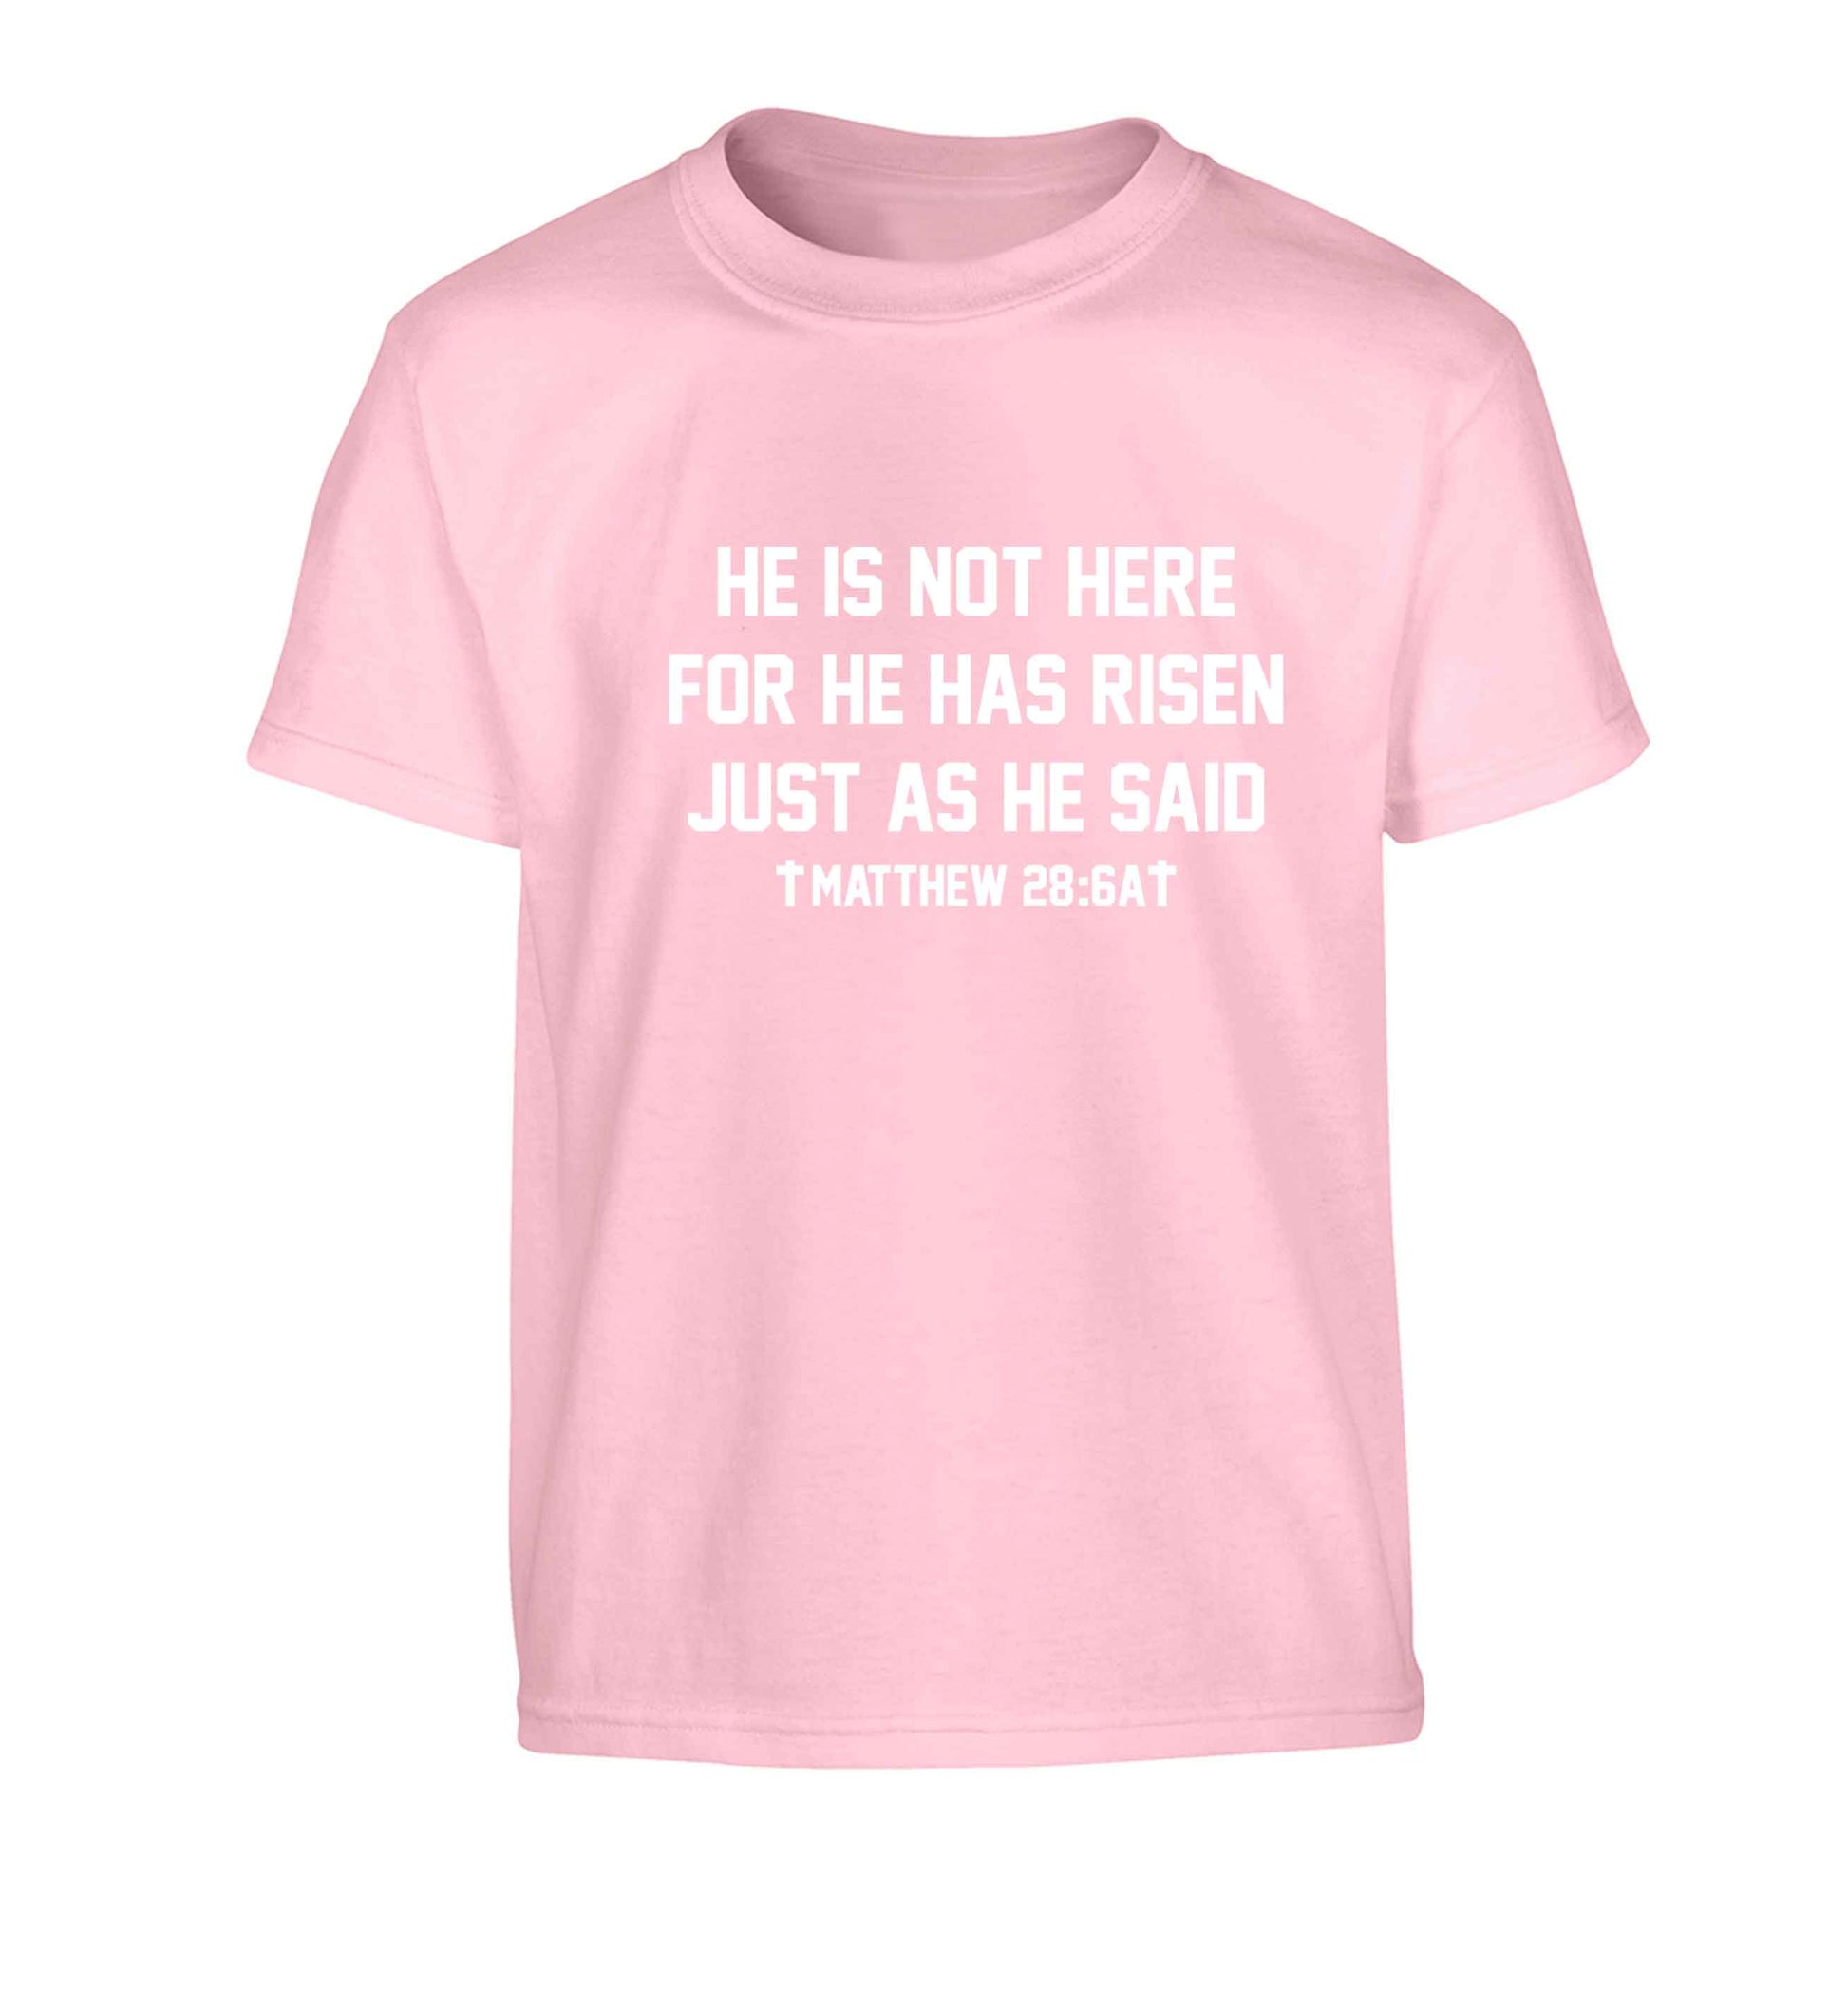 He is not here for he has risen just as he said matthew 28:6A Children's light pink Tshirt 12-13 Years